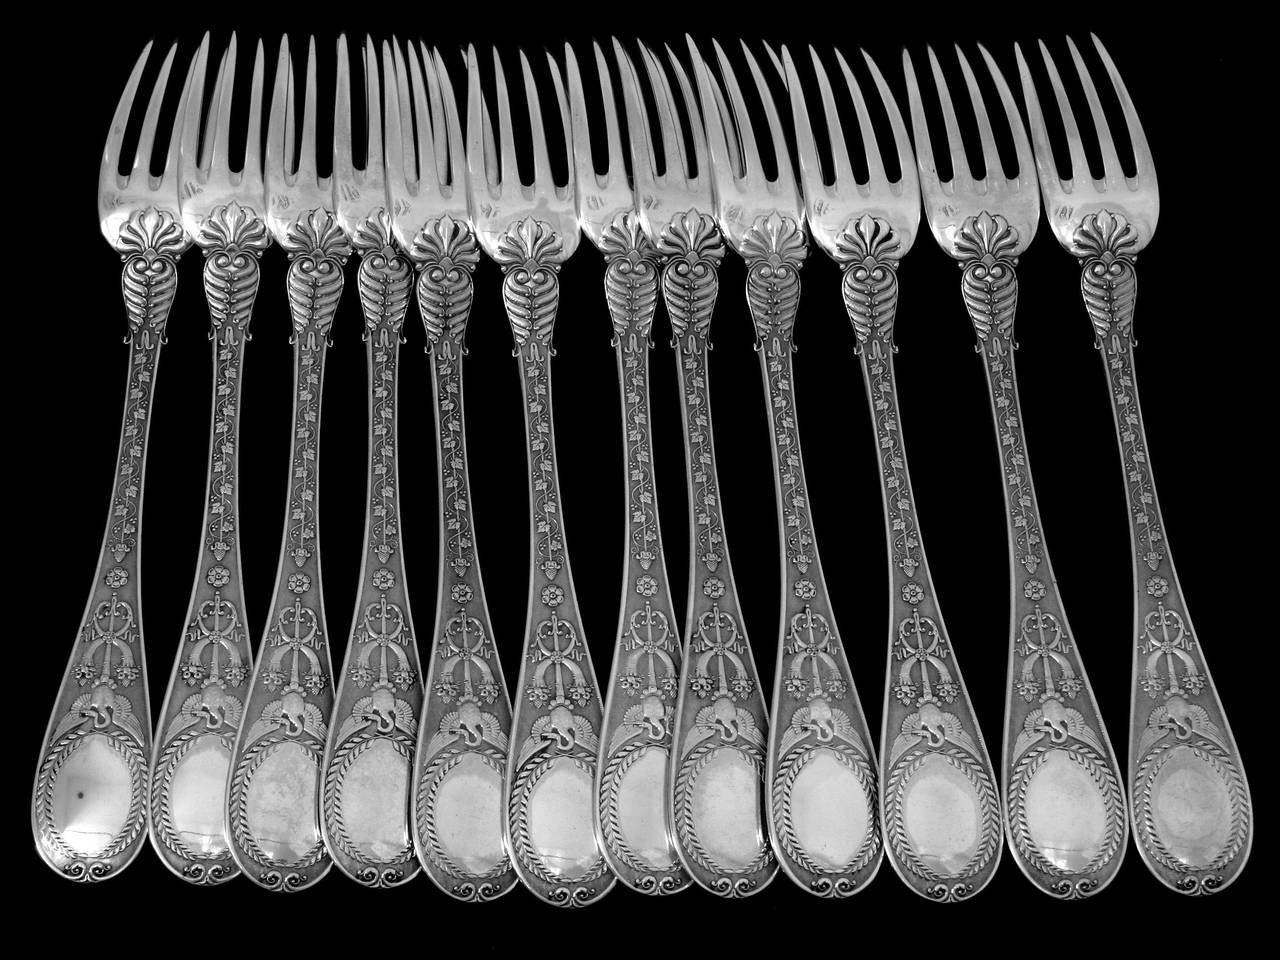 Empire Queille Masterpiece French Sterling Silver Dinner Flatware 36 pc Swan, Putti